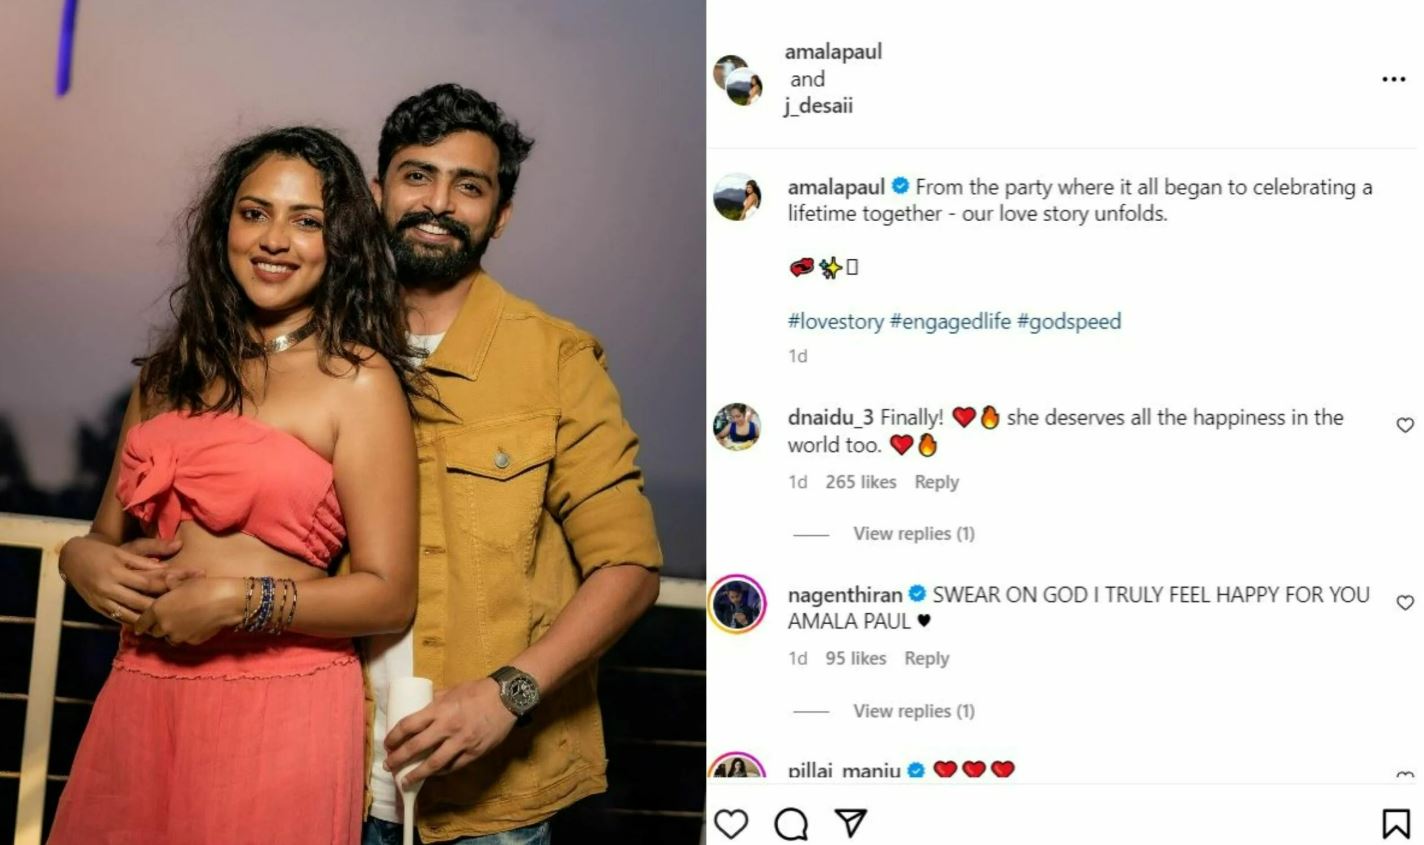 Amala Paul's Instagram post about getting engaged